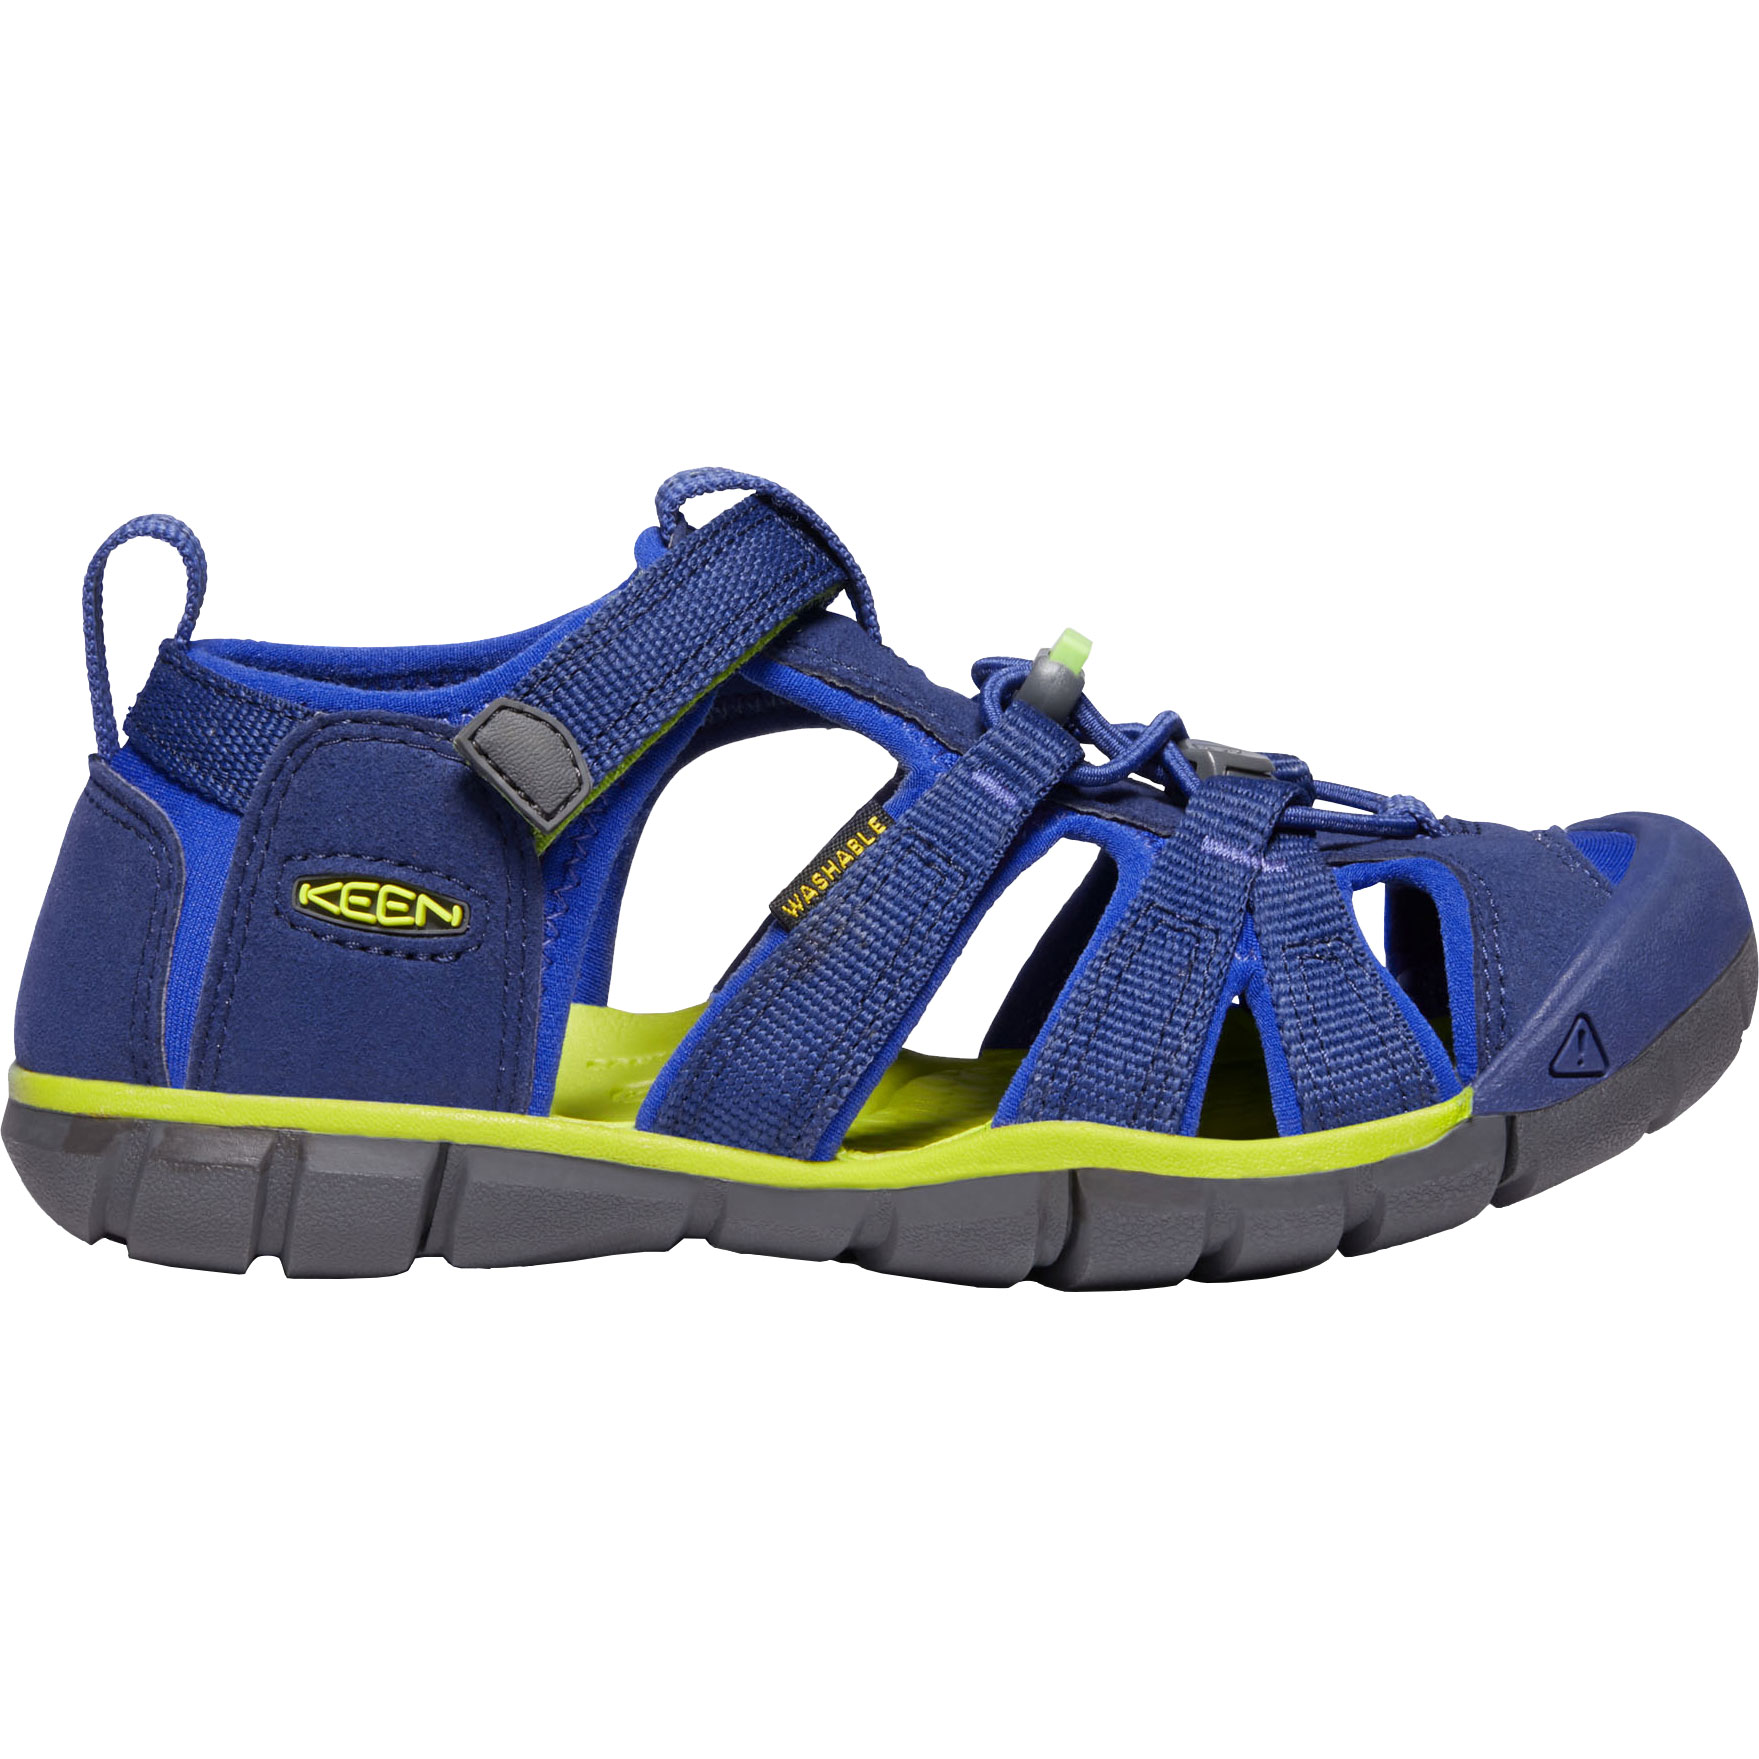 Picture of KEEN Seacamp II CNX Kids Sandal - Blue Depths / Chartreuse